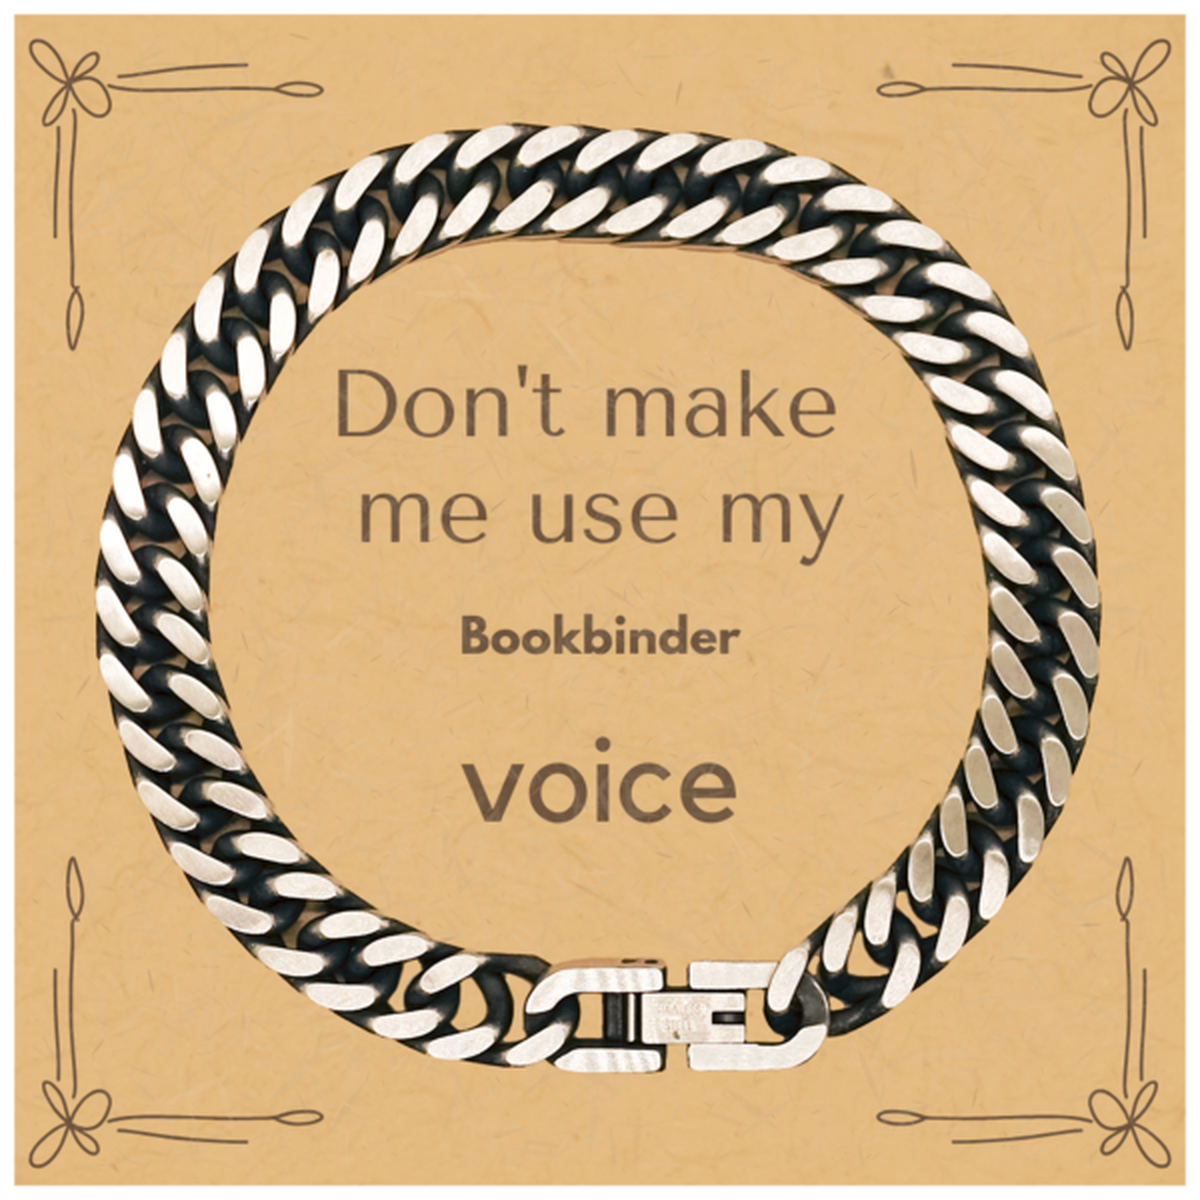 Don't make me use my Bookbinder voice, Sarcasm Bookbinder Card Gifts, Christmas Bookbinder Cuban Link Chain Bracelet Birthday Unique Gifts For Bookbinder Coworkers, Men, Women, Colleague, Friends